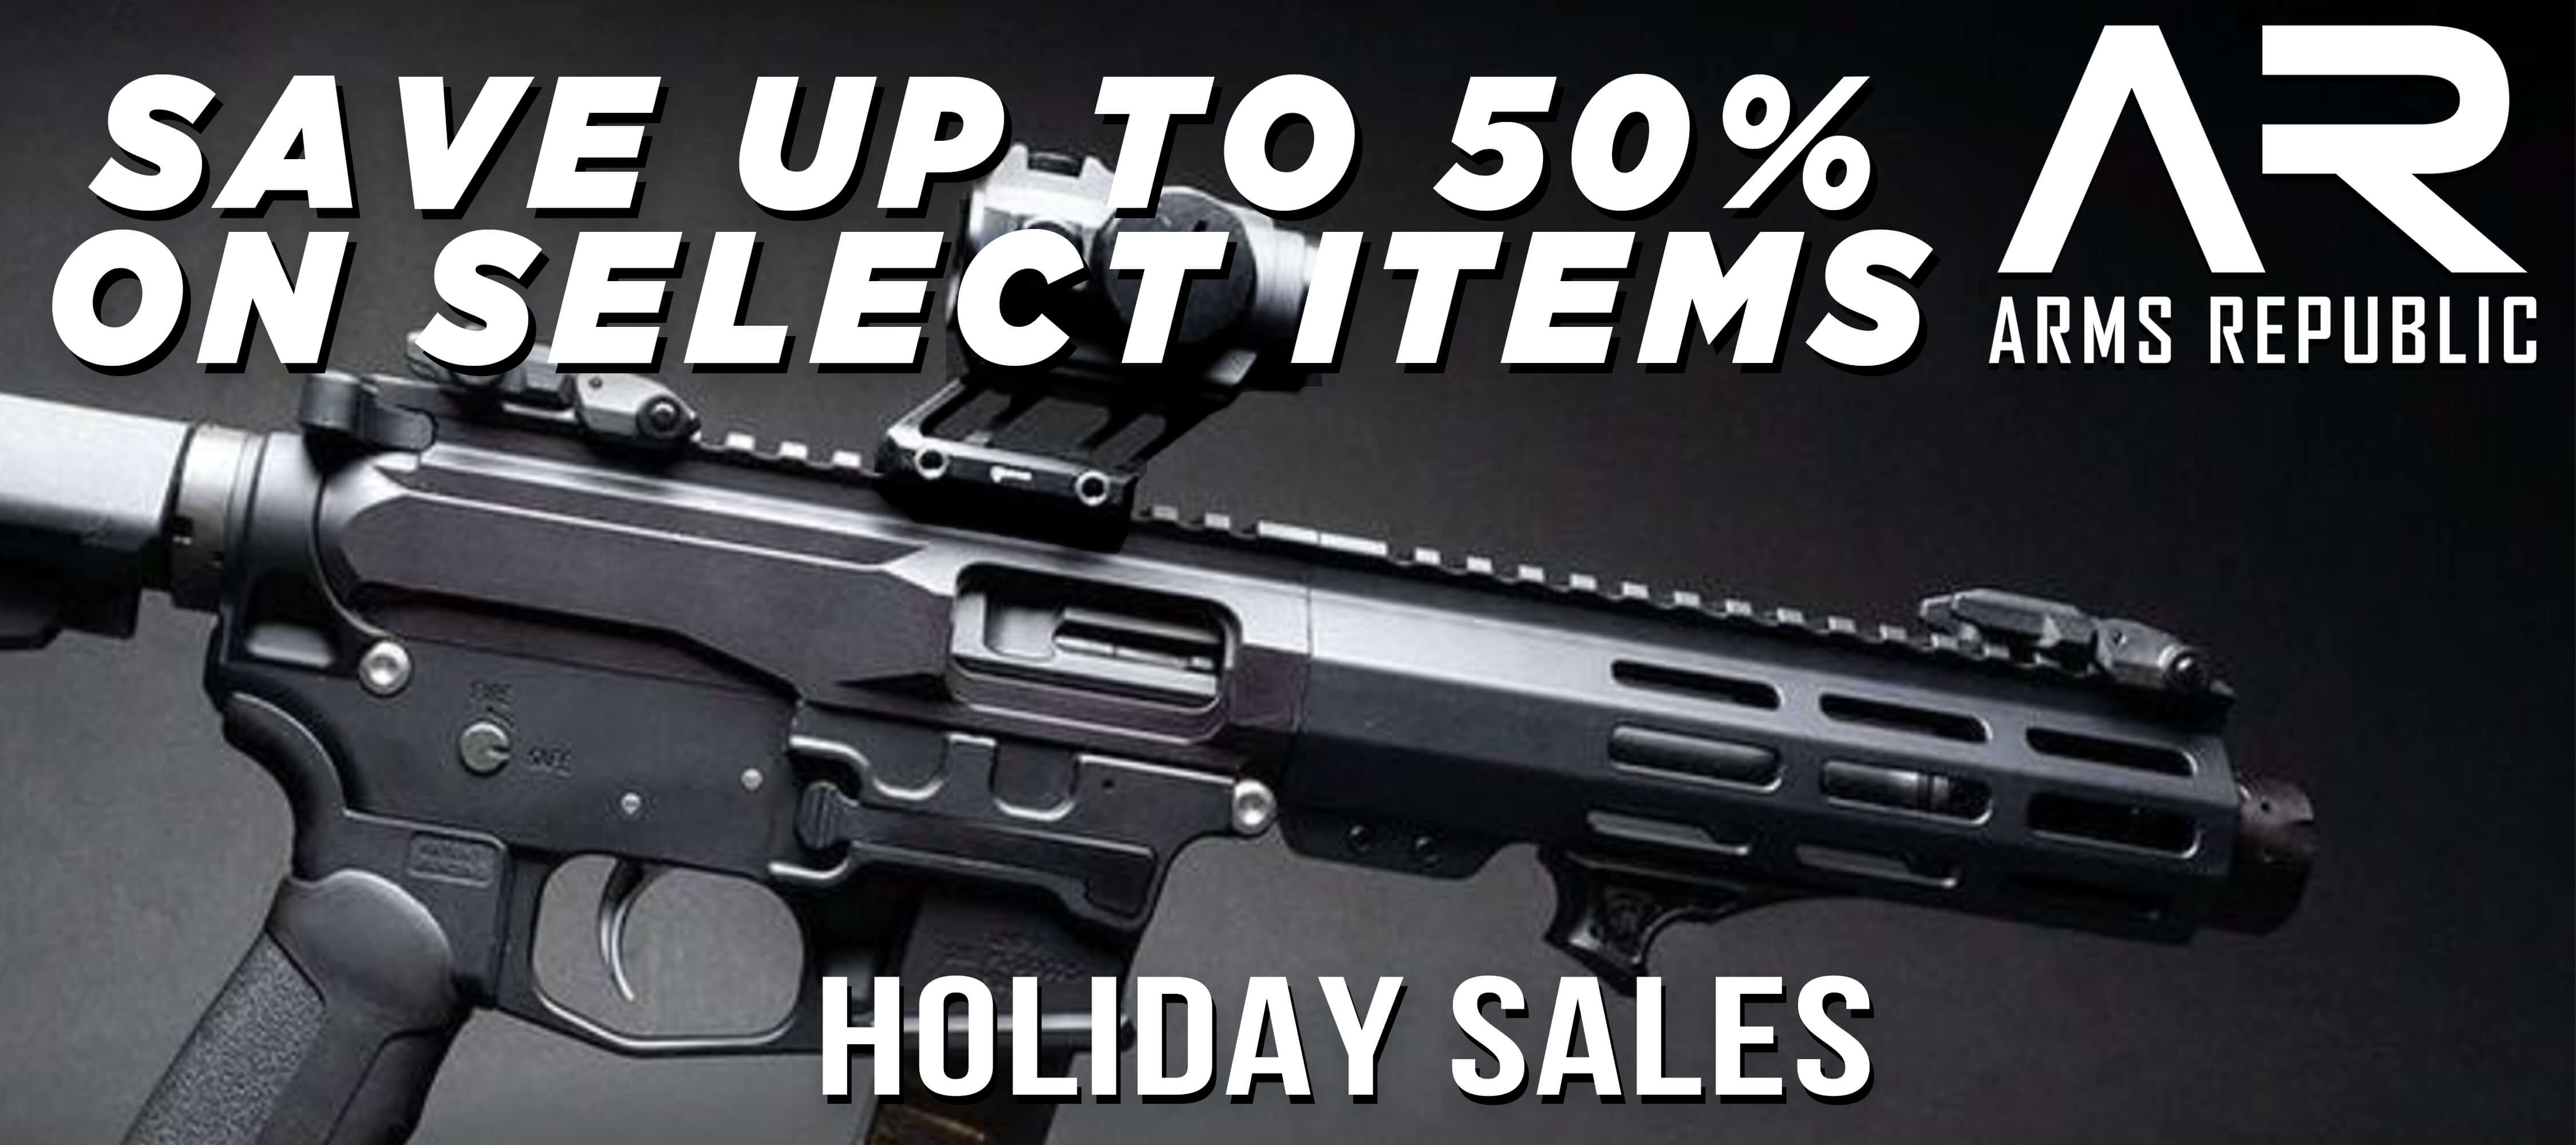 Arms Republic Holiday Sales